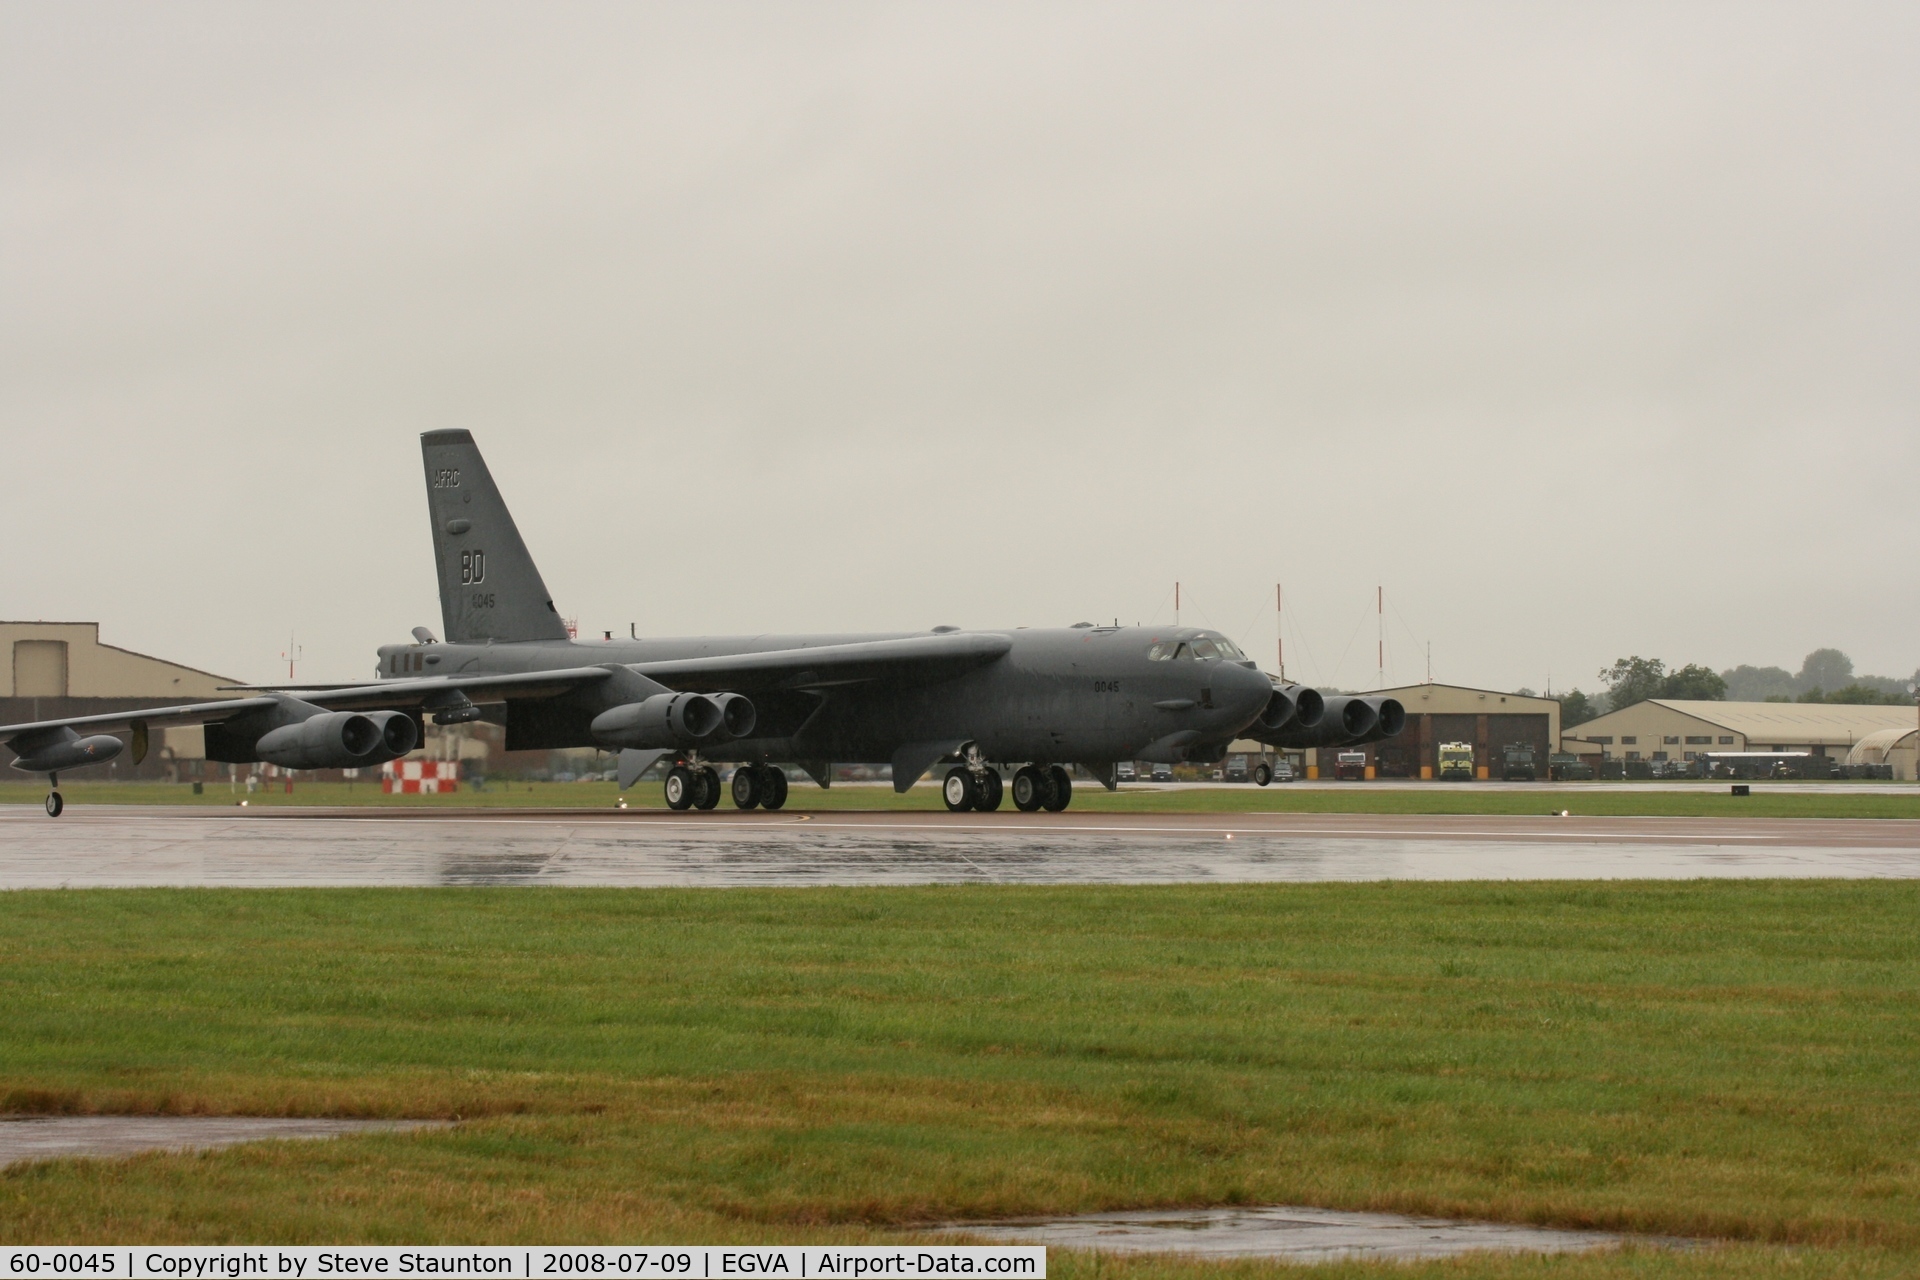 60-0045, 1960 Boeing B-52H Stratofortress C/N 464410, Taken at the Royal International Air Tattoo 2008 during arrivals and departures (show days cancelled due to bad weather)